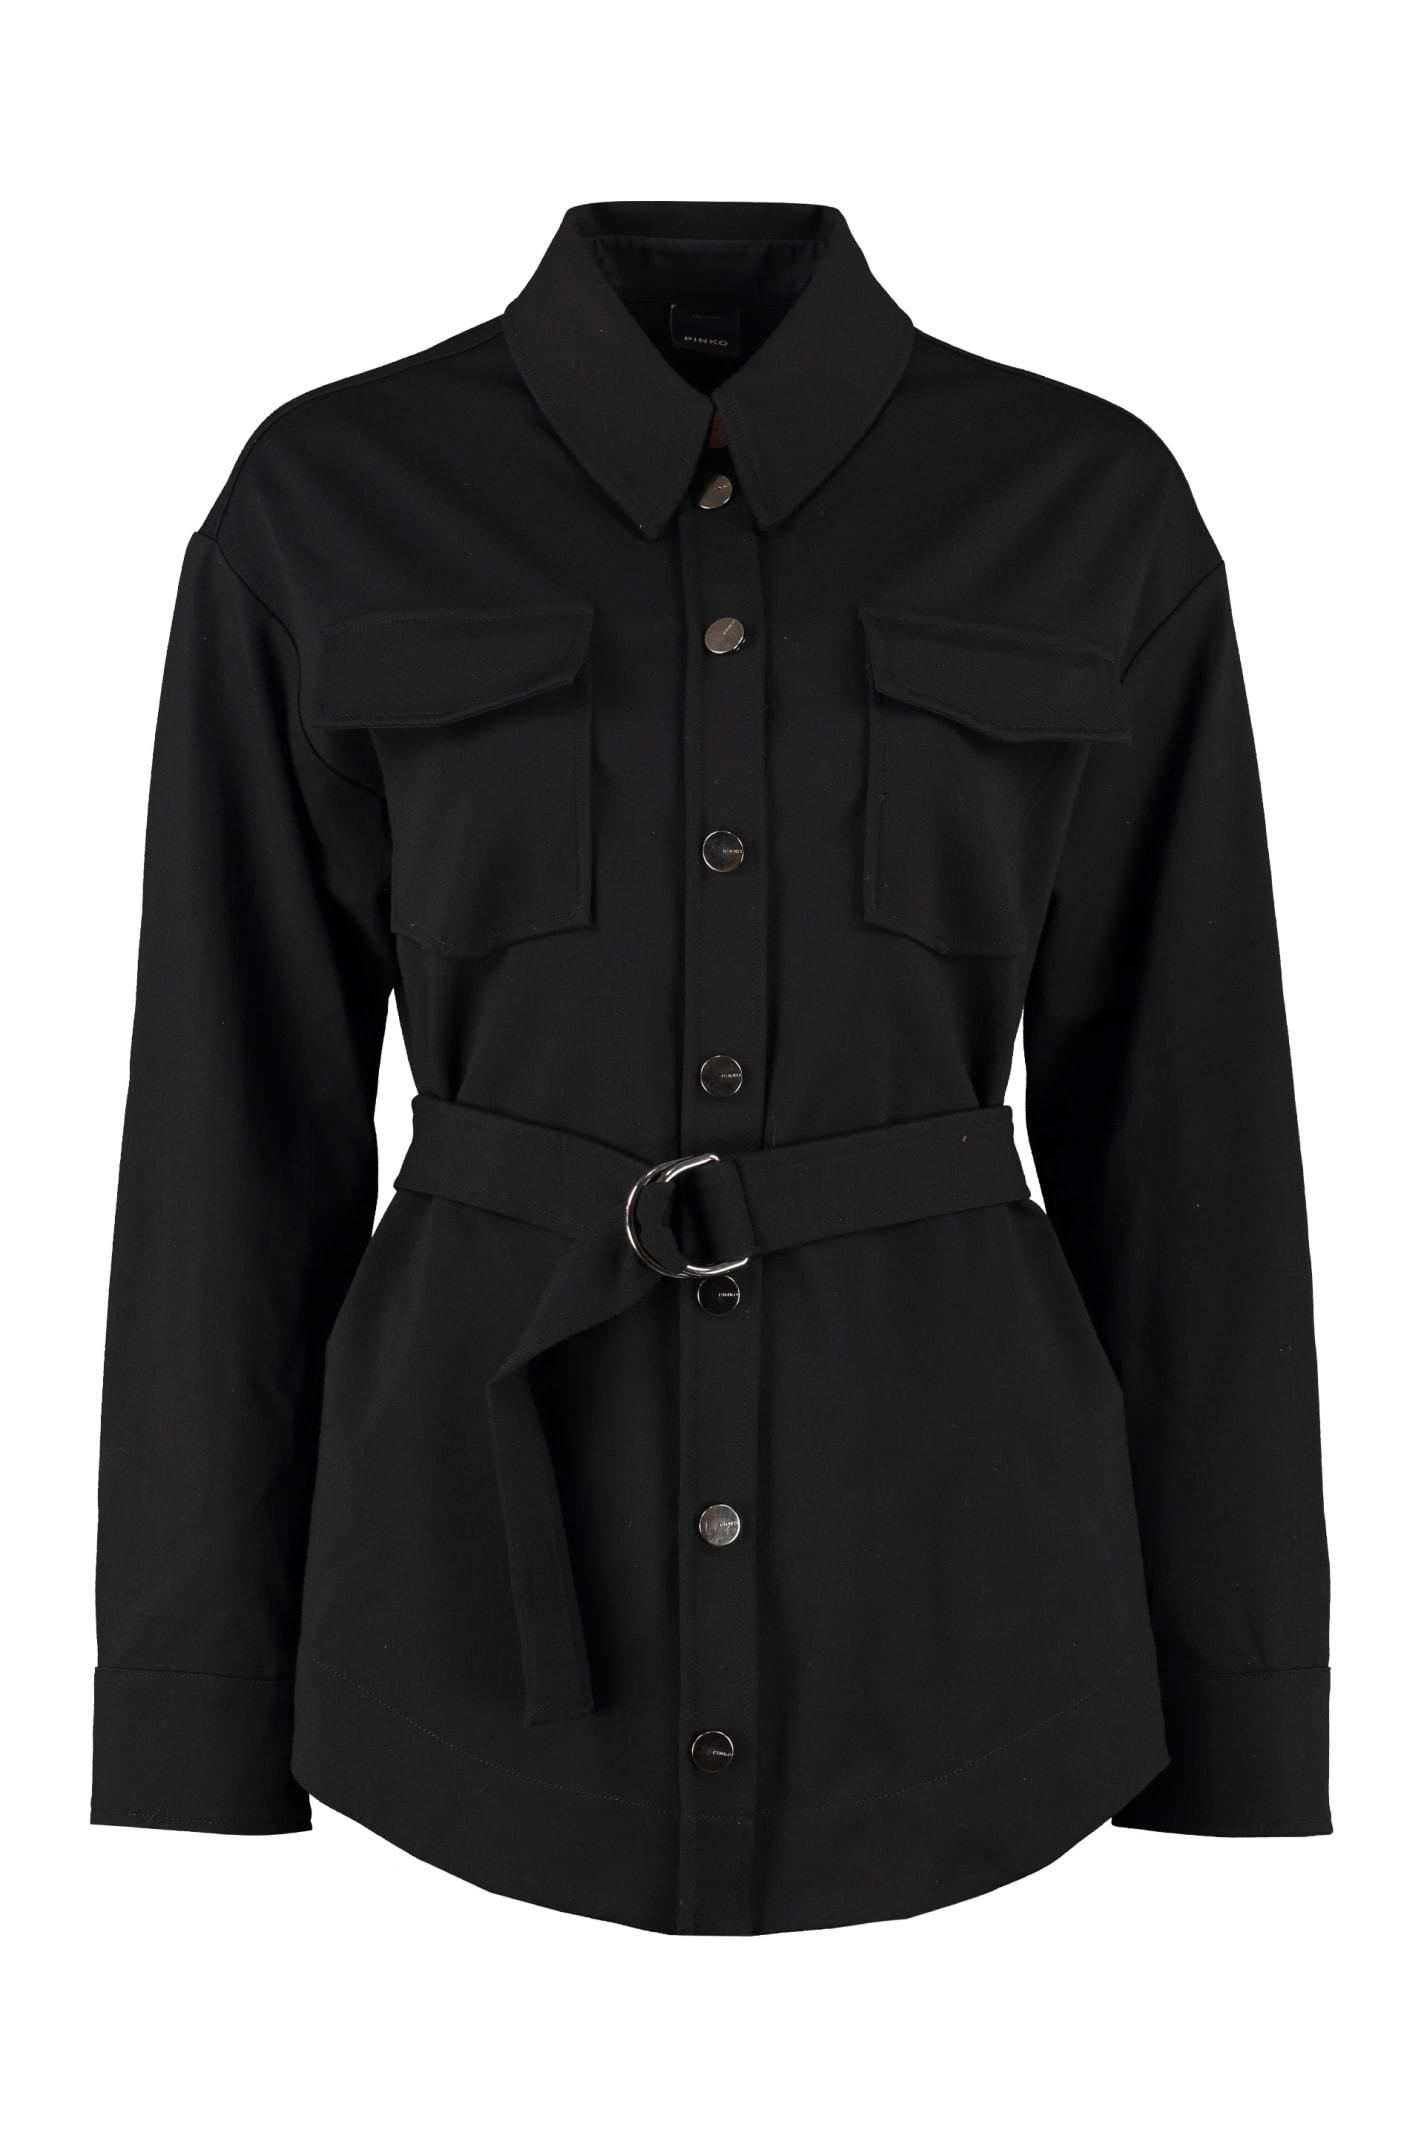 Pinko Synthetic Stretch Viscose Shirt Jacket in Black - Save 20% - Lyst